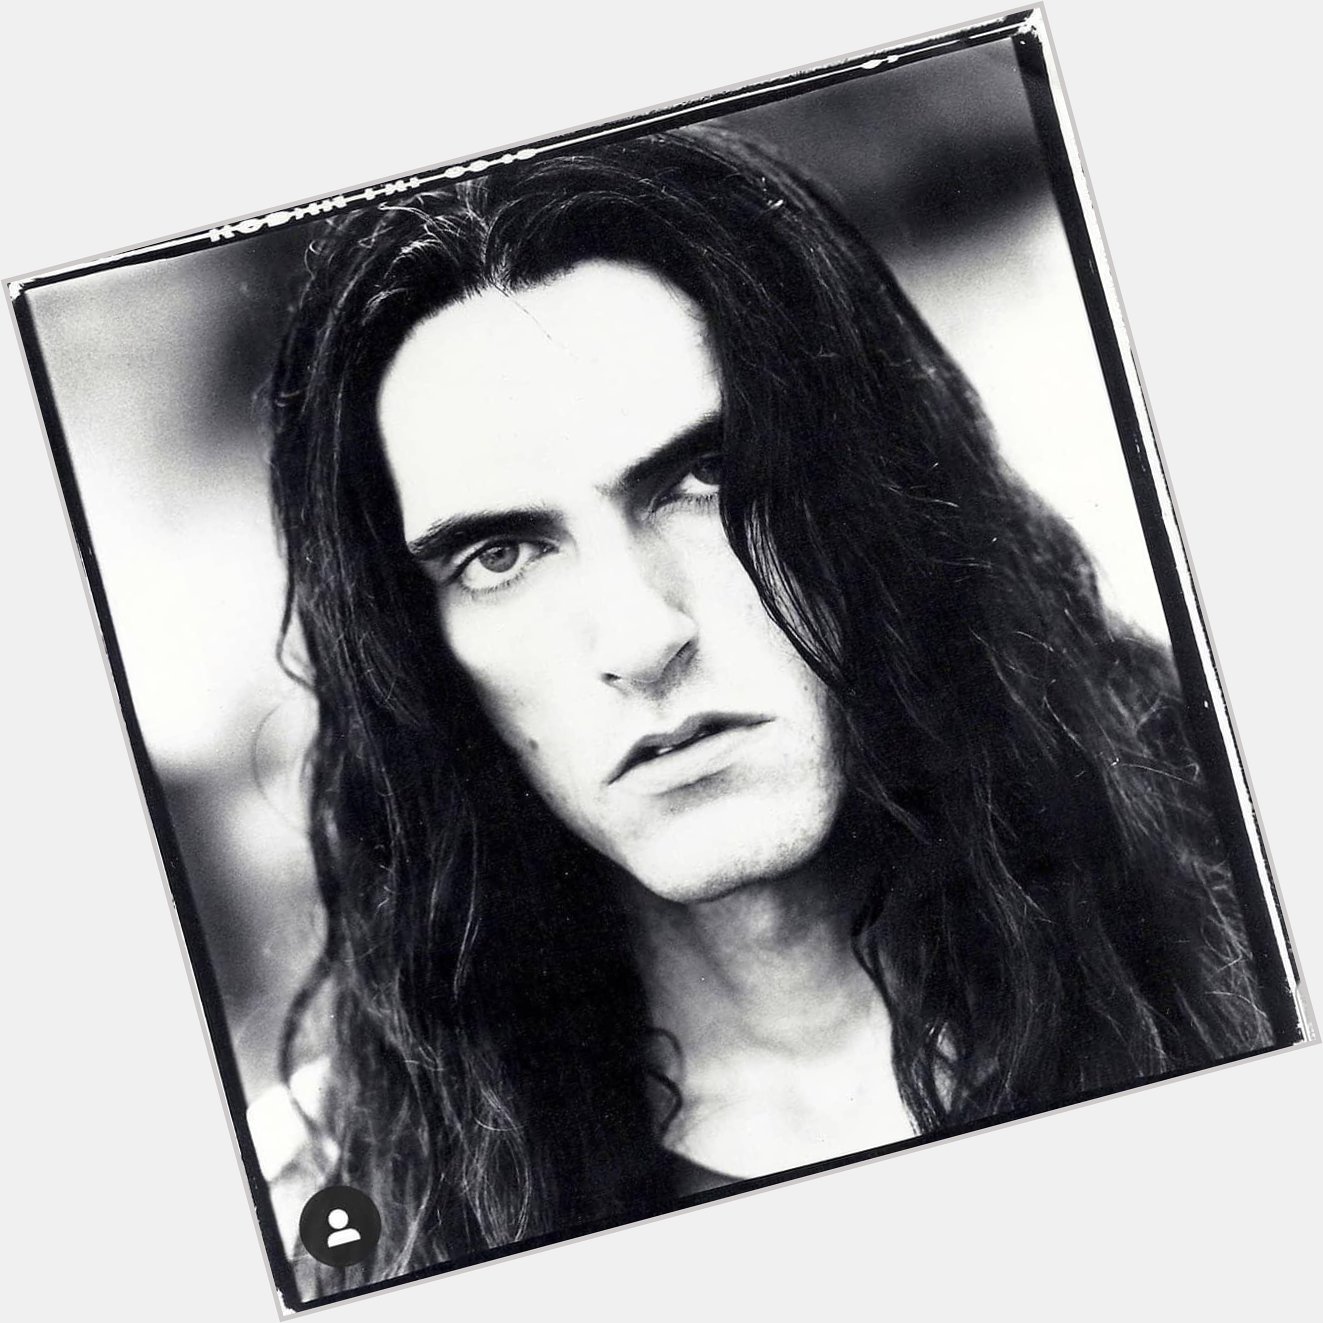 And today happy birthday to one of my heroes RIP the green man peter steele . Miss you   